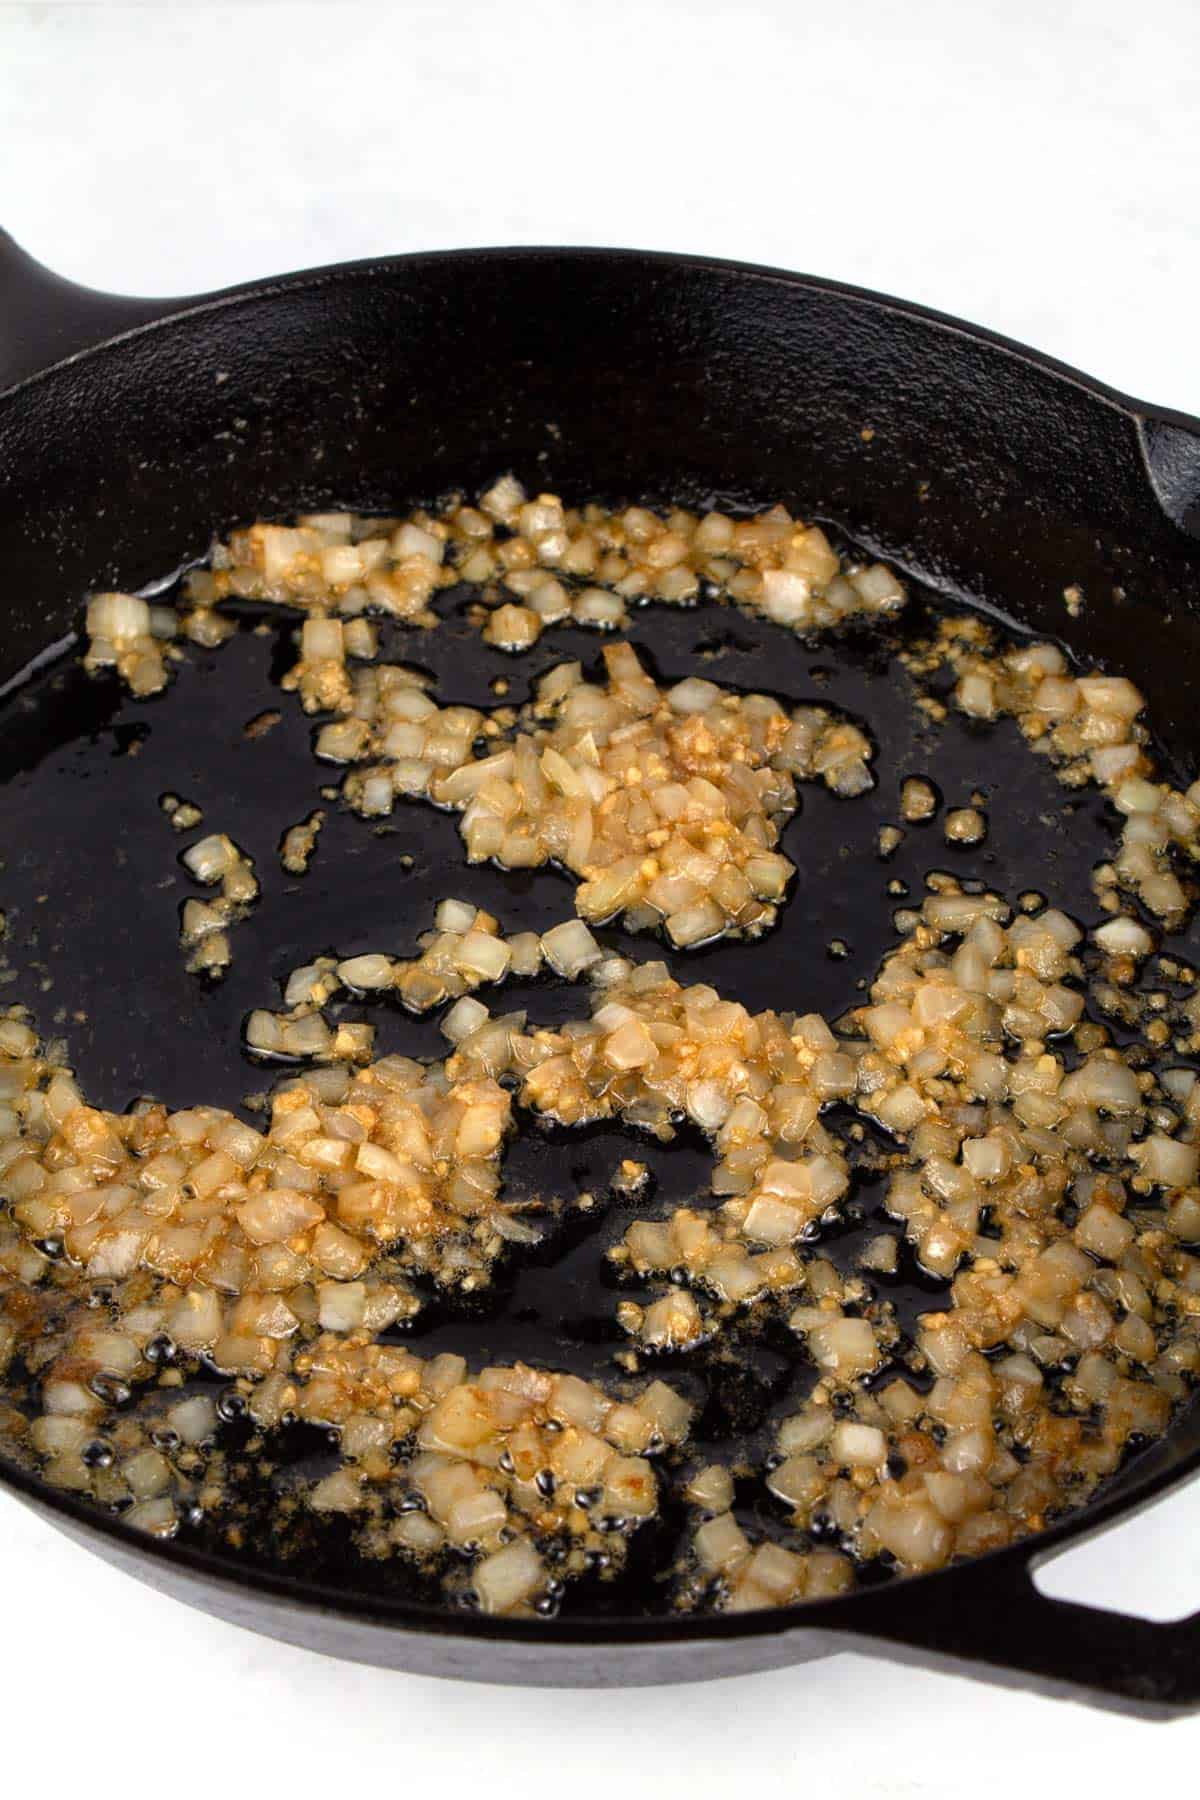 Cooking onions and garlic on the stovetop before adding in corn.